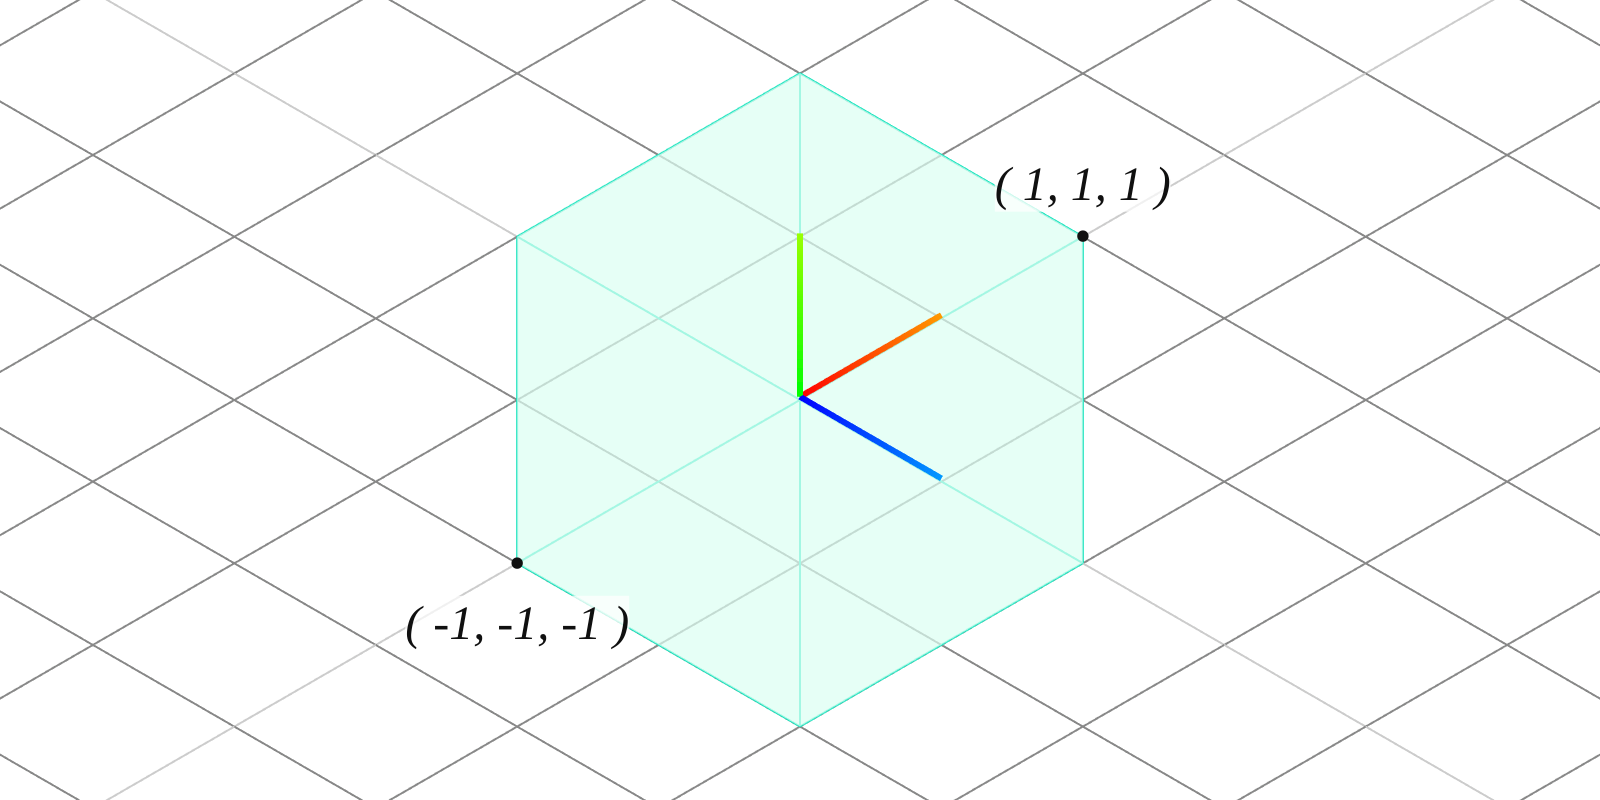 2x2x2 cube with corners at (-1, -1, -1) and (1, 1, 1)